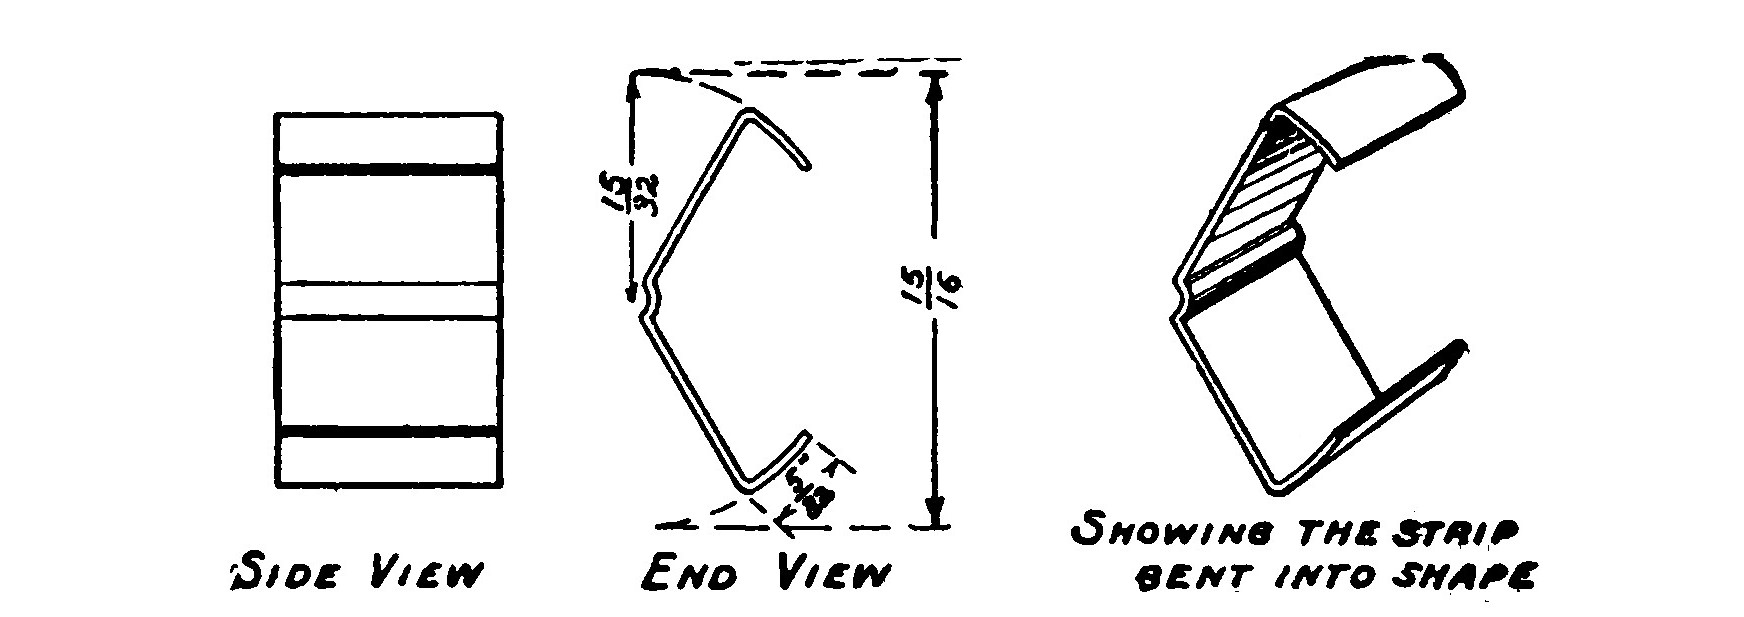 FIG. 20.—Details of the Three-pole Armature.